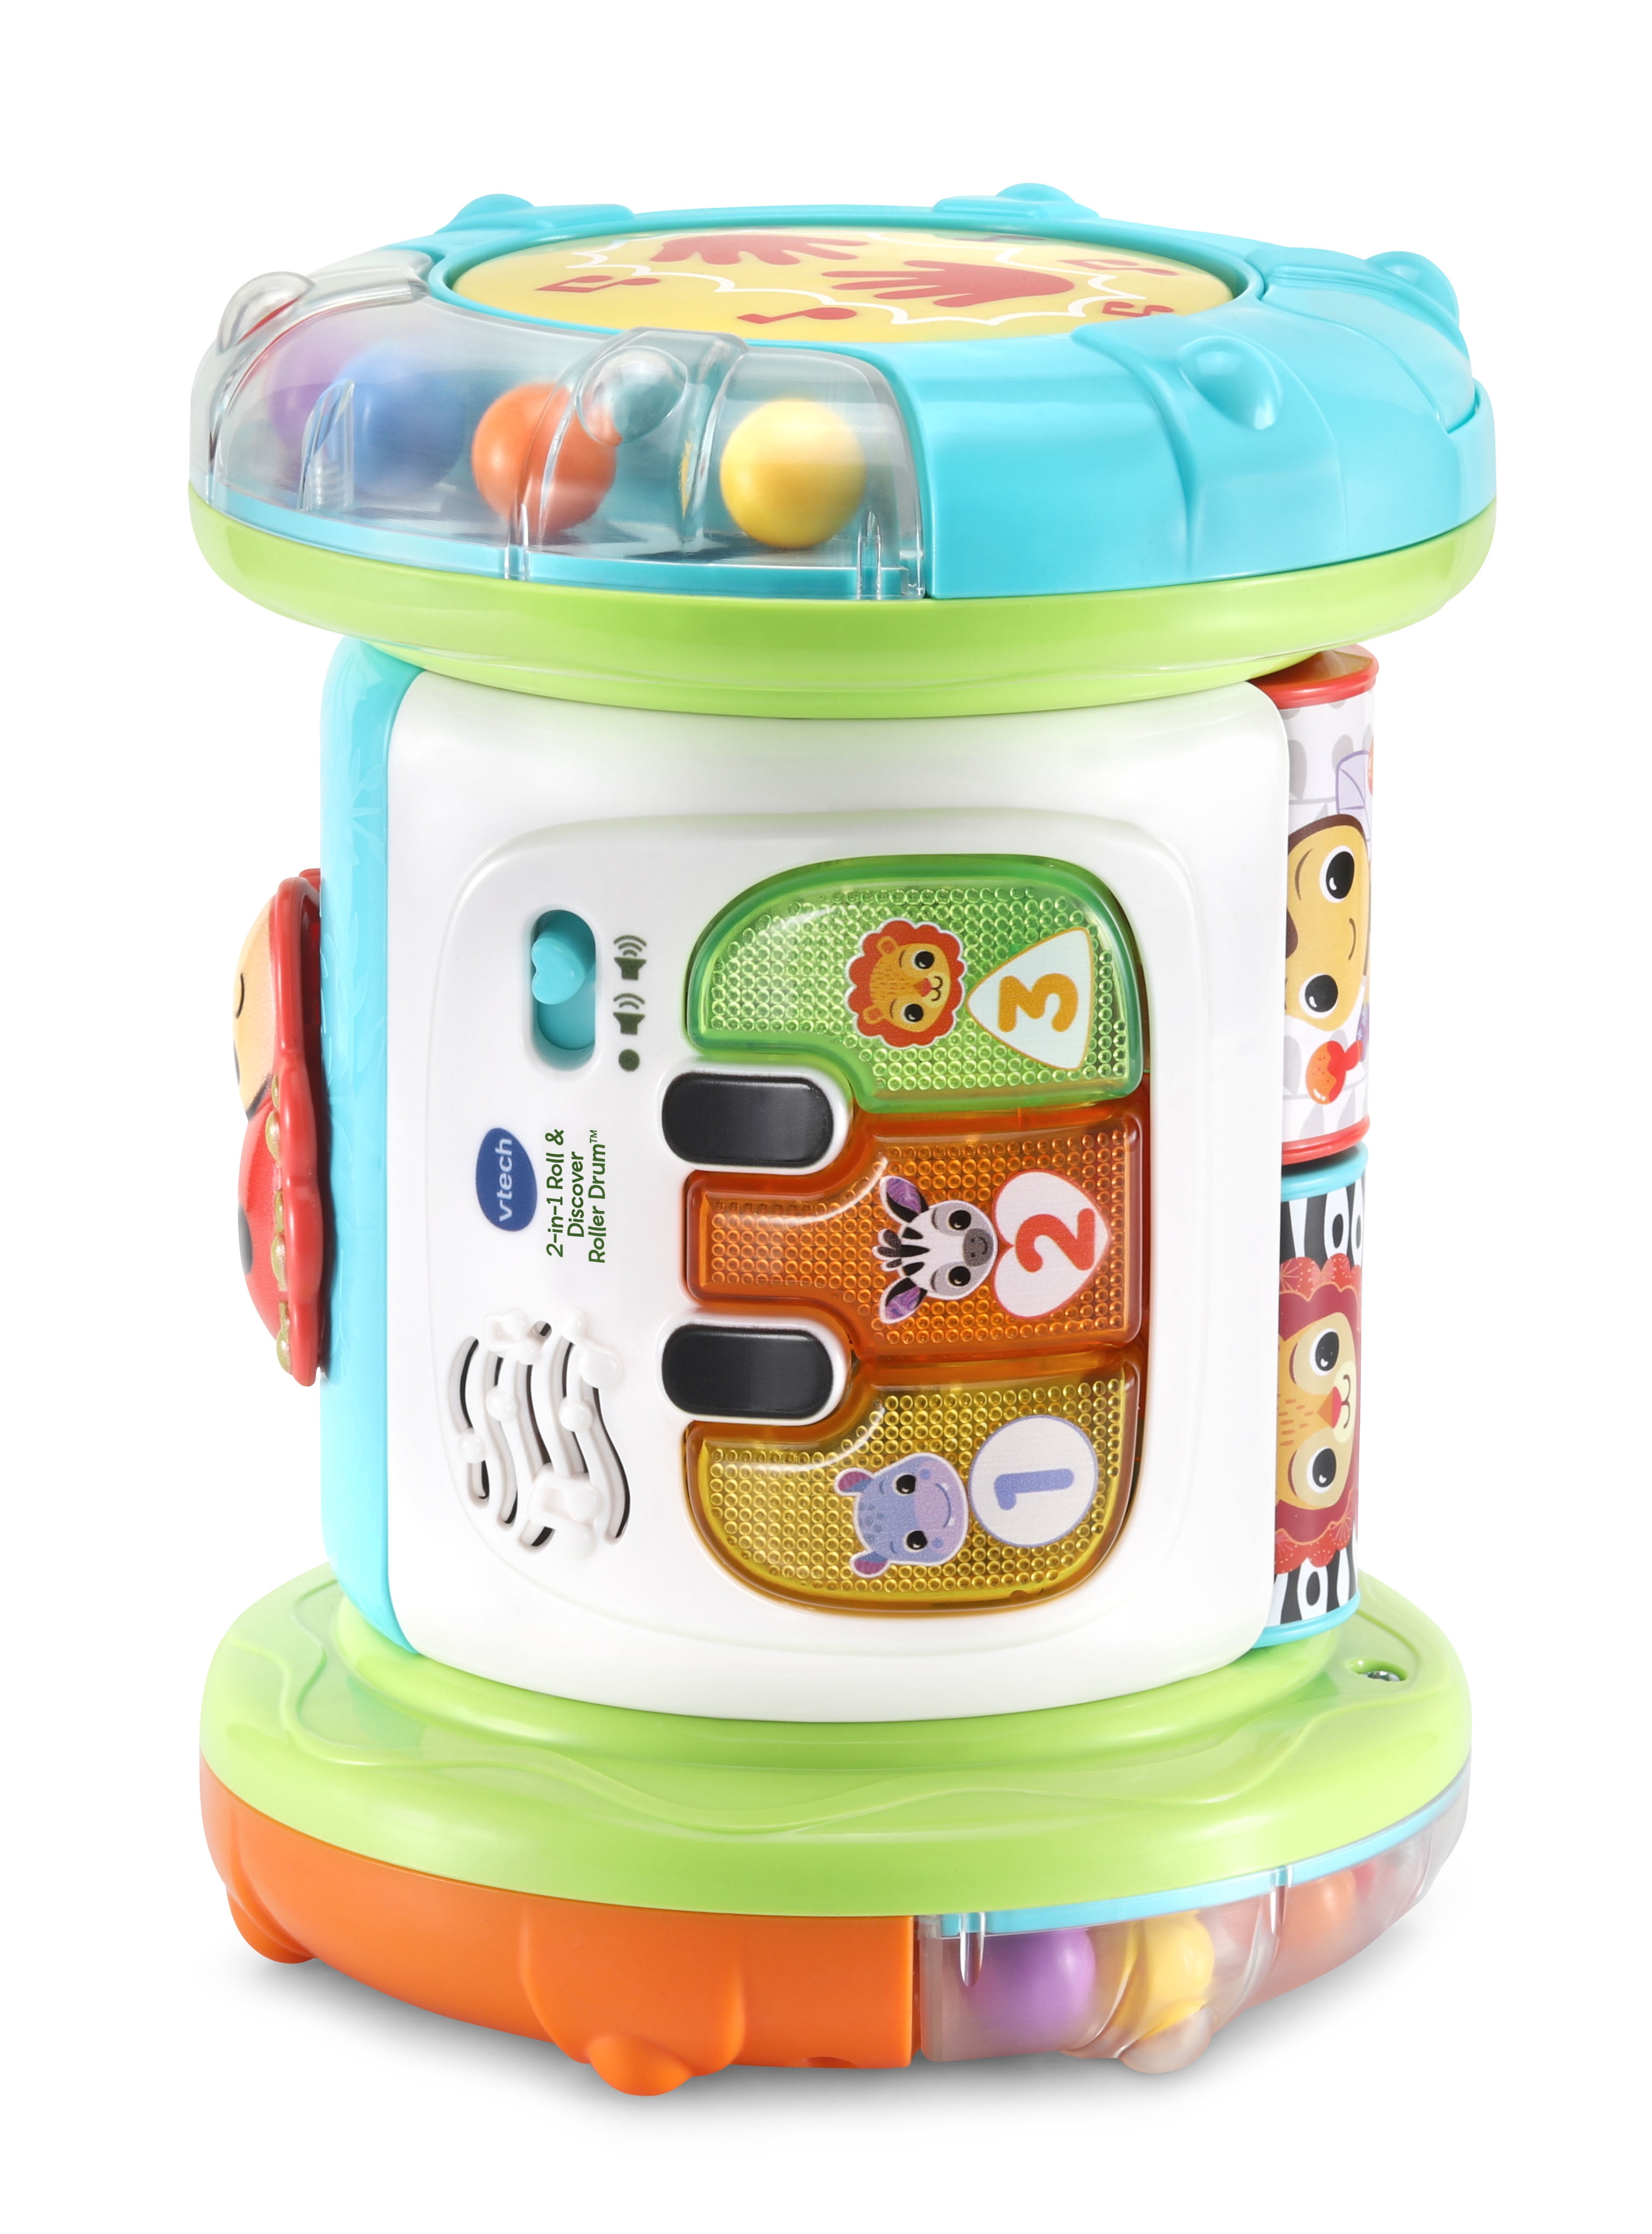 VTech® 2-in-1 Roll & Discover Roller Drum™ for Babies, Walmart Exclusive 